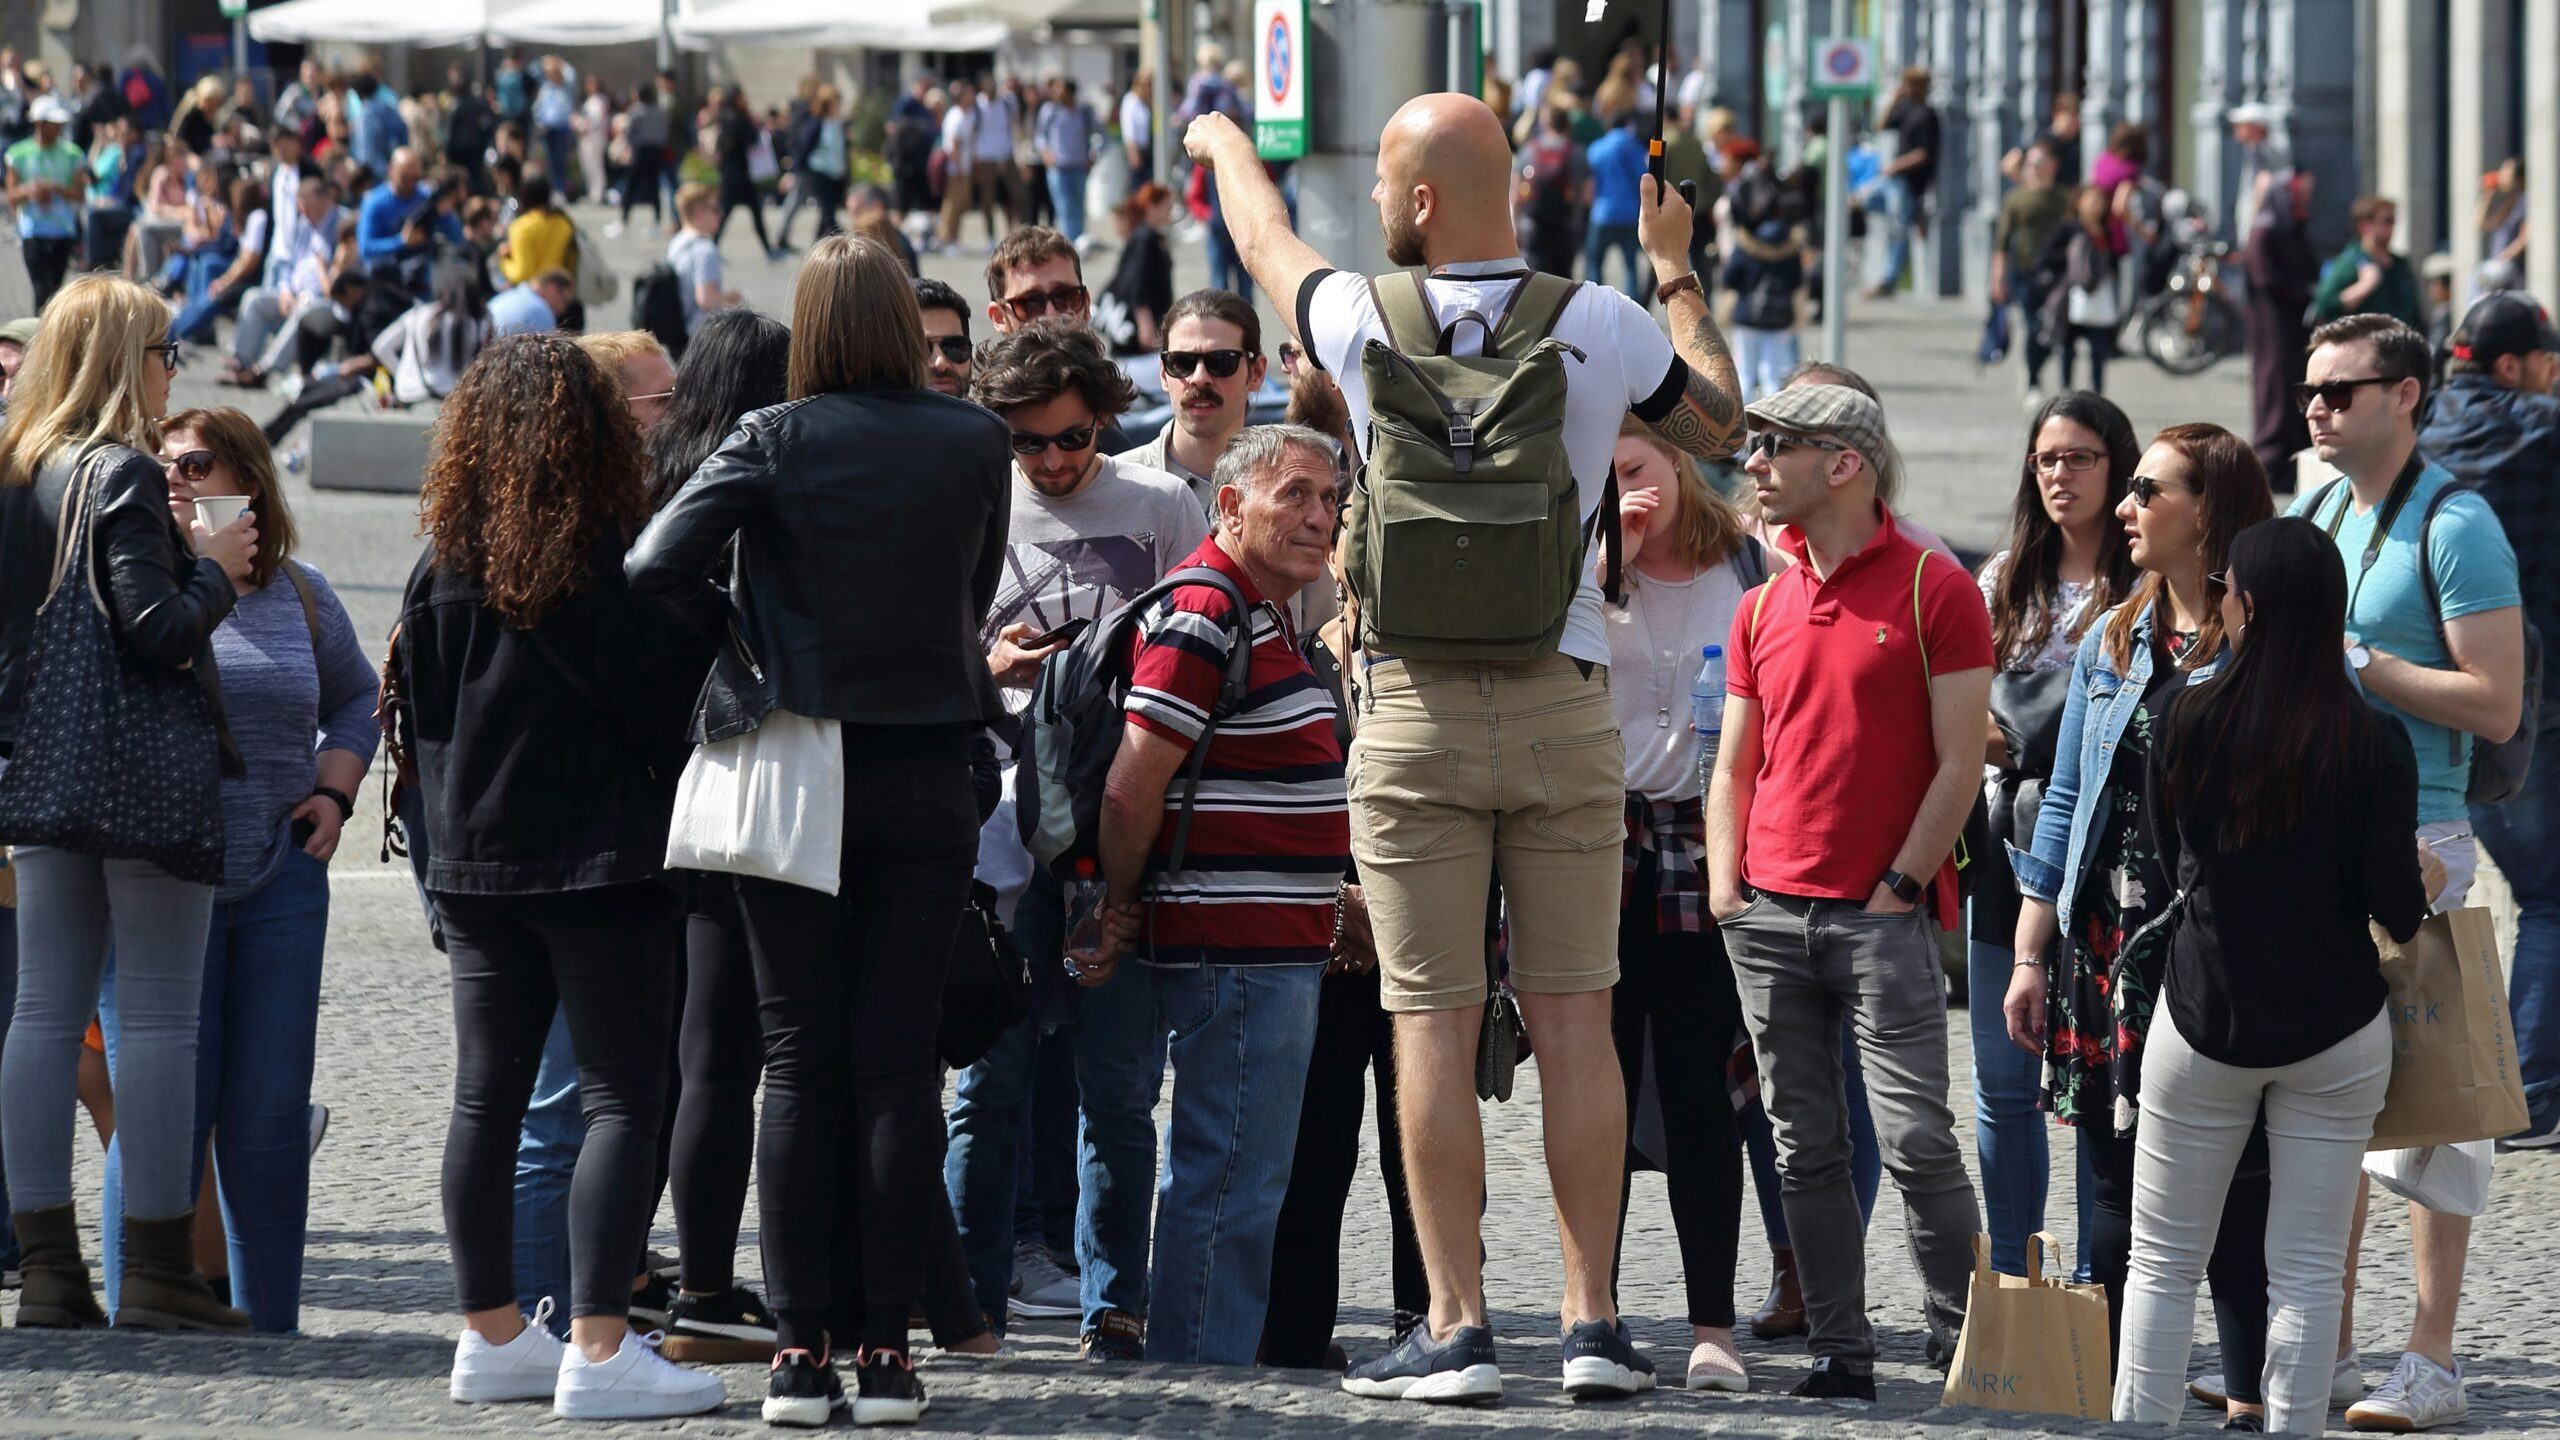 Tour guide with an umbrella and a group of tourists on Dam square in Amsterdam, The Netherlands on May 23, 2019